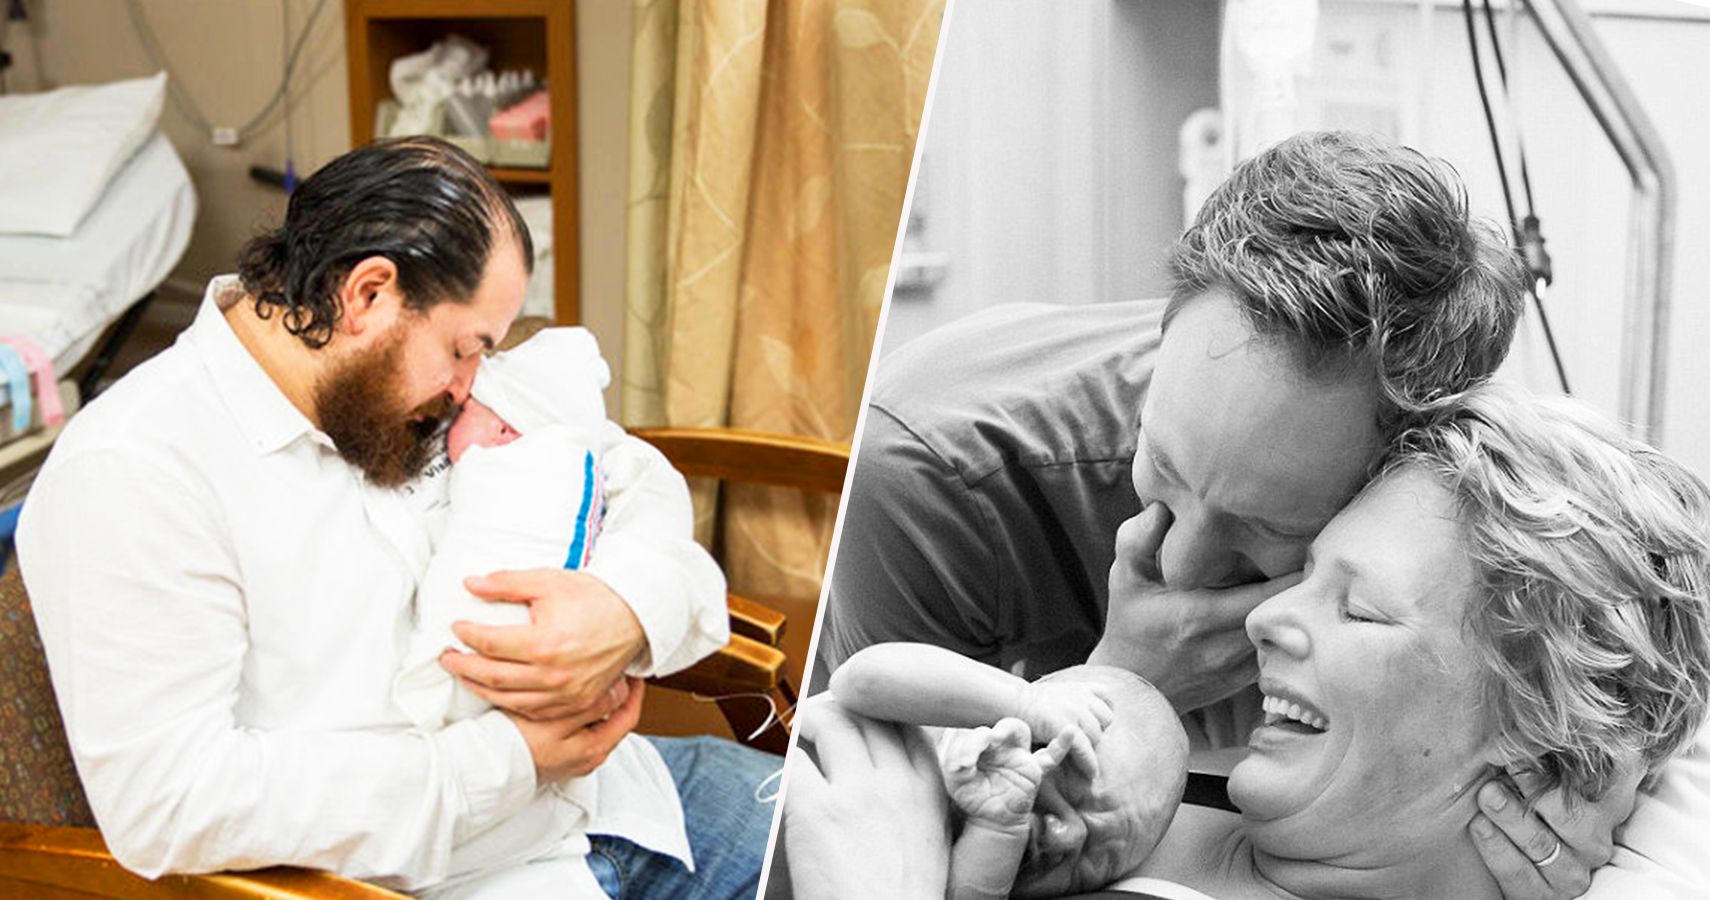 19 Pics Of Meeting Their Babies For The First Time